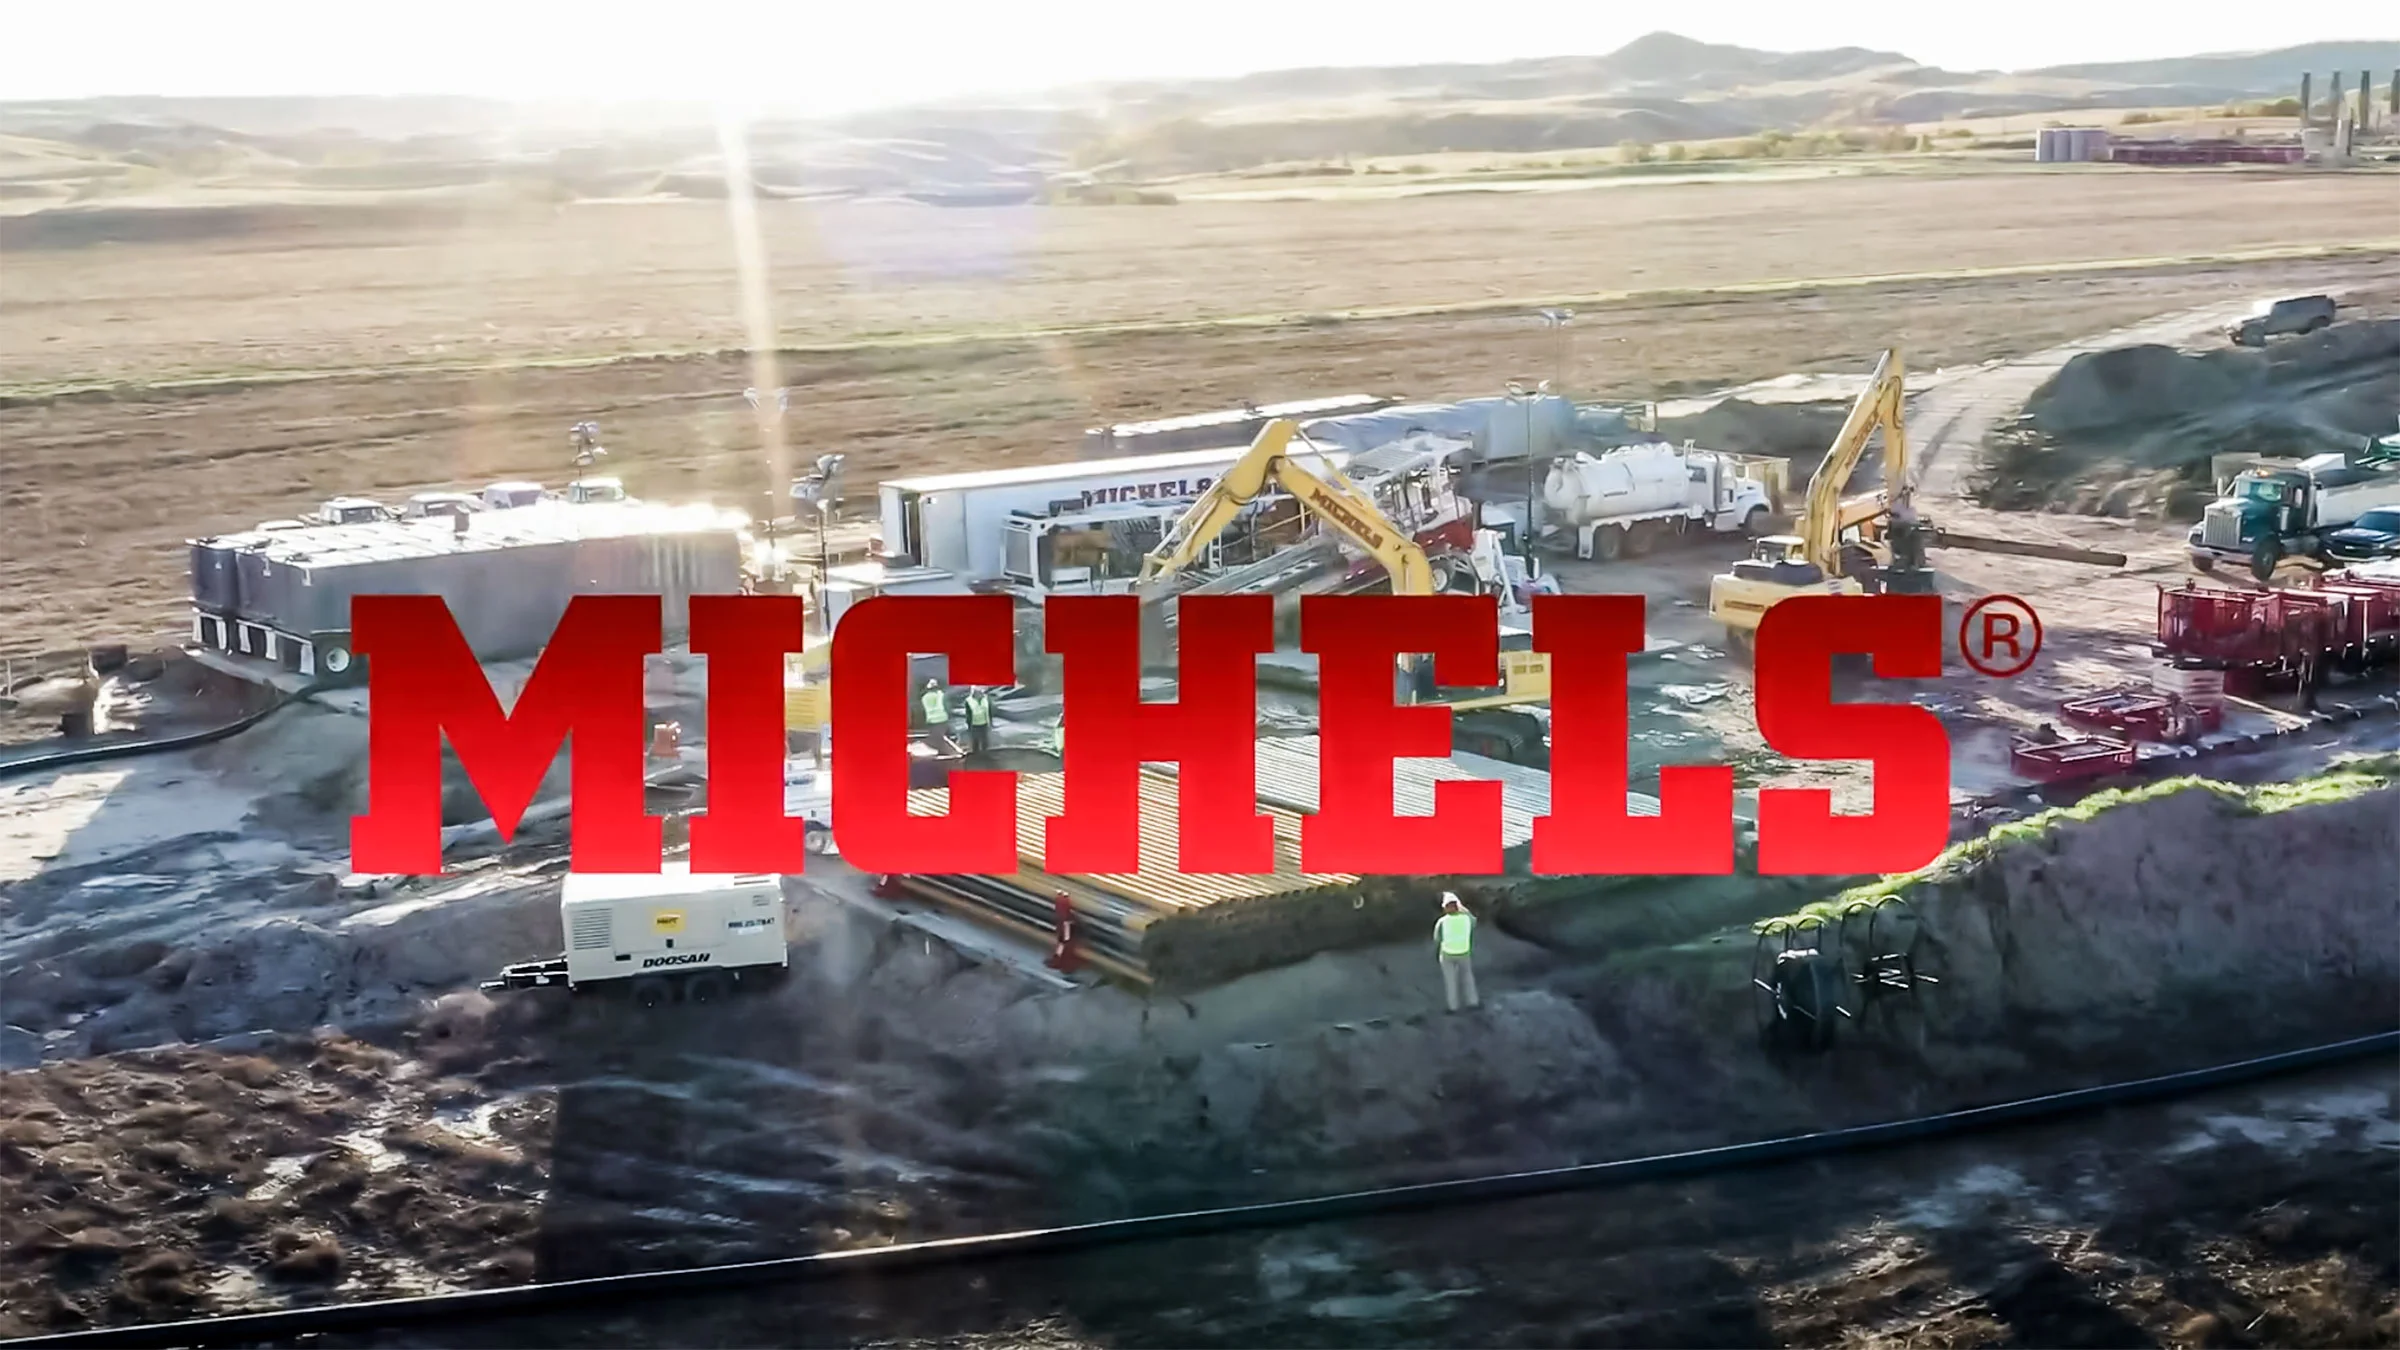 A brilliant sun rises over a Michels Trenchless jobsite, featuring the Michels logo.